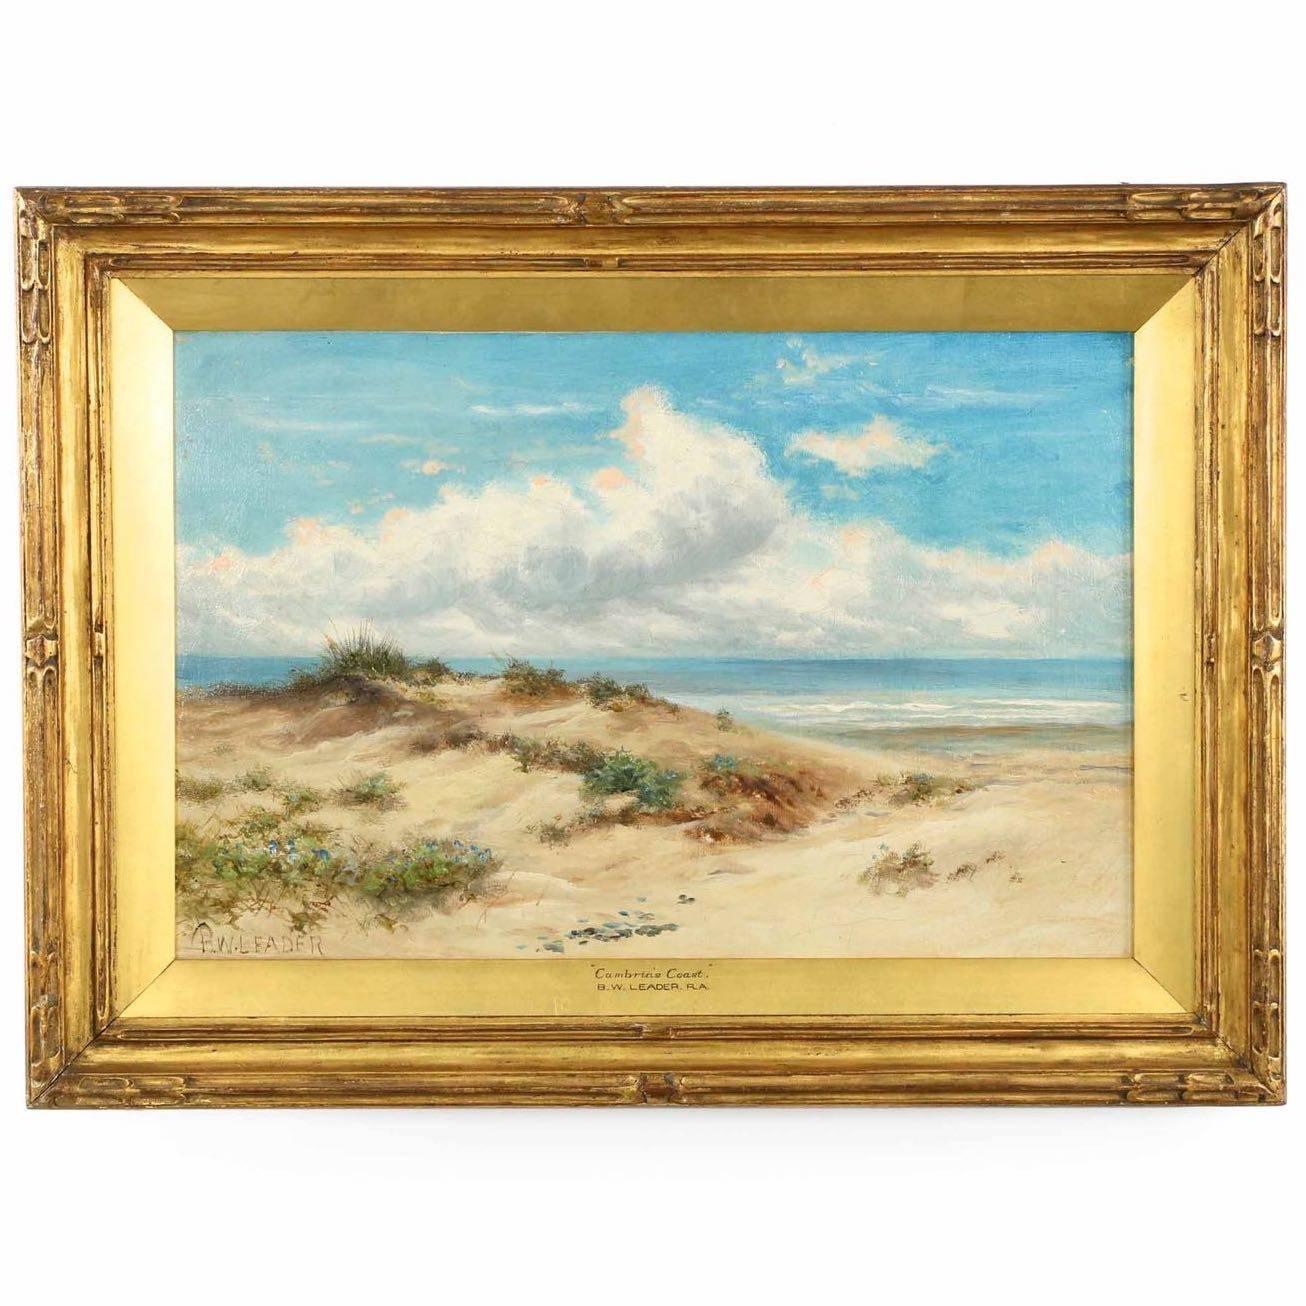 Early 20th Century British Landscape Oil Painting of "Cambria's Coast"